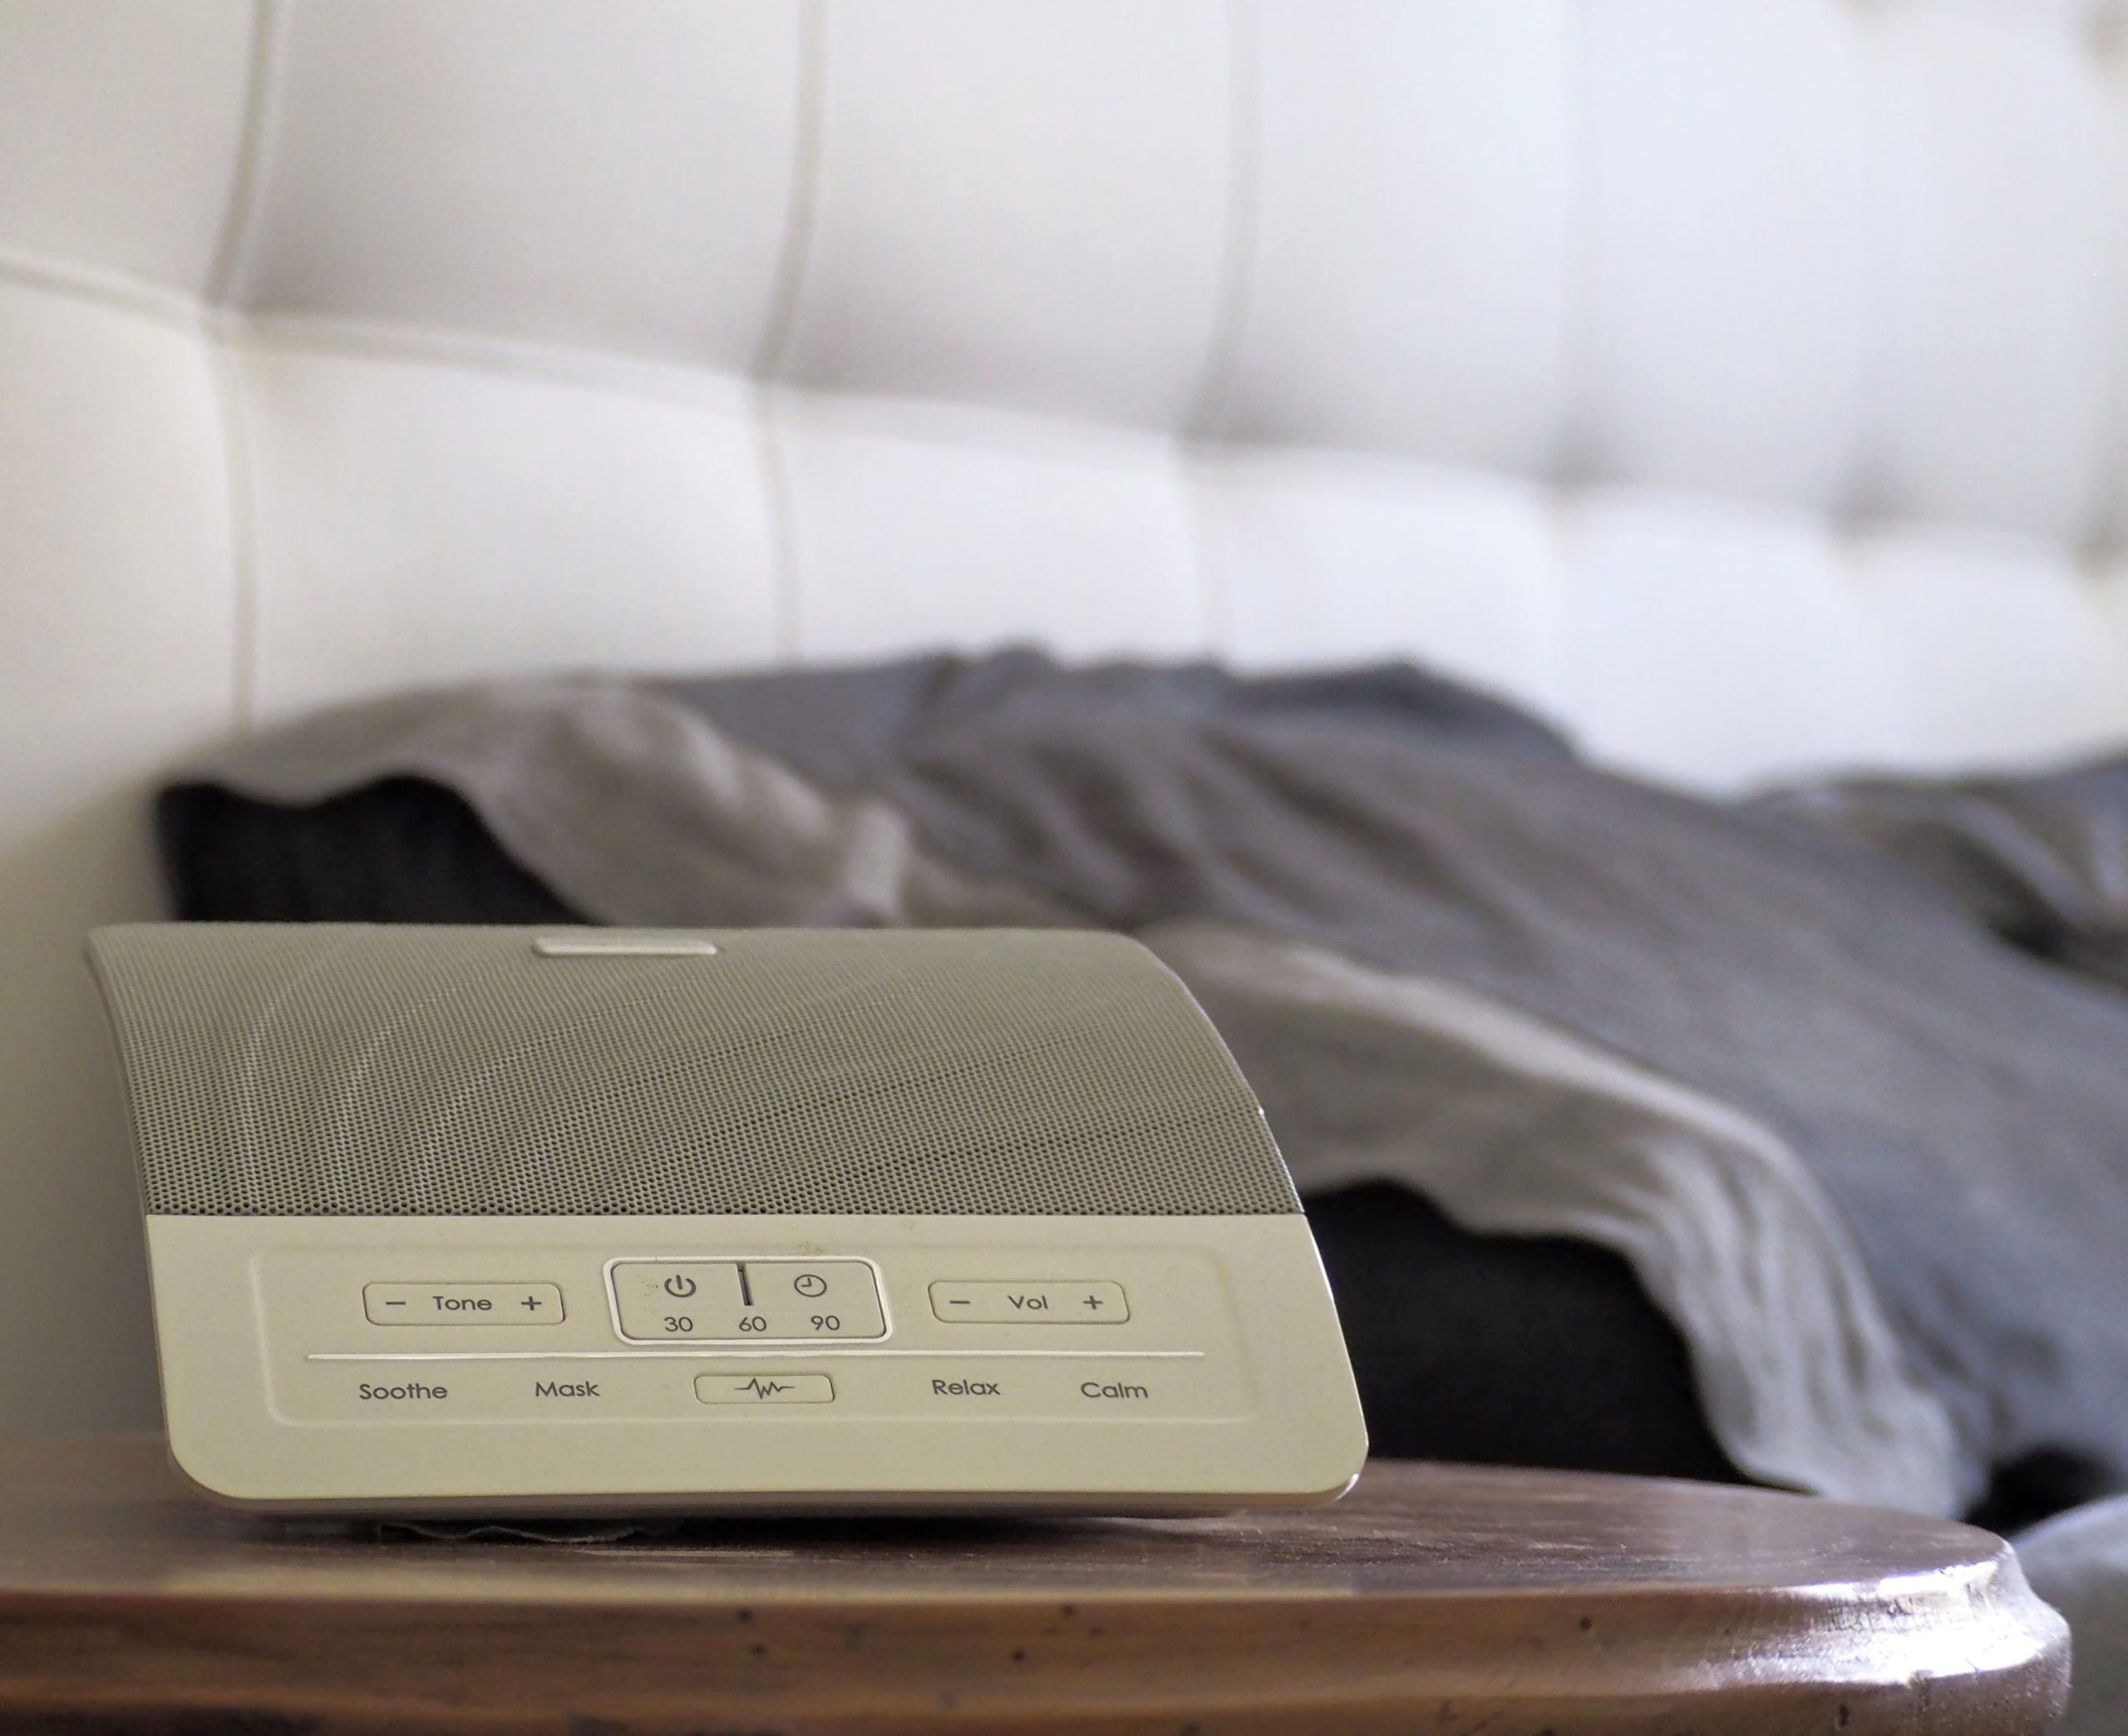 White noise machine, device that produces random sounds used for sleep aid